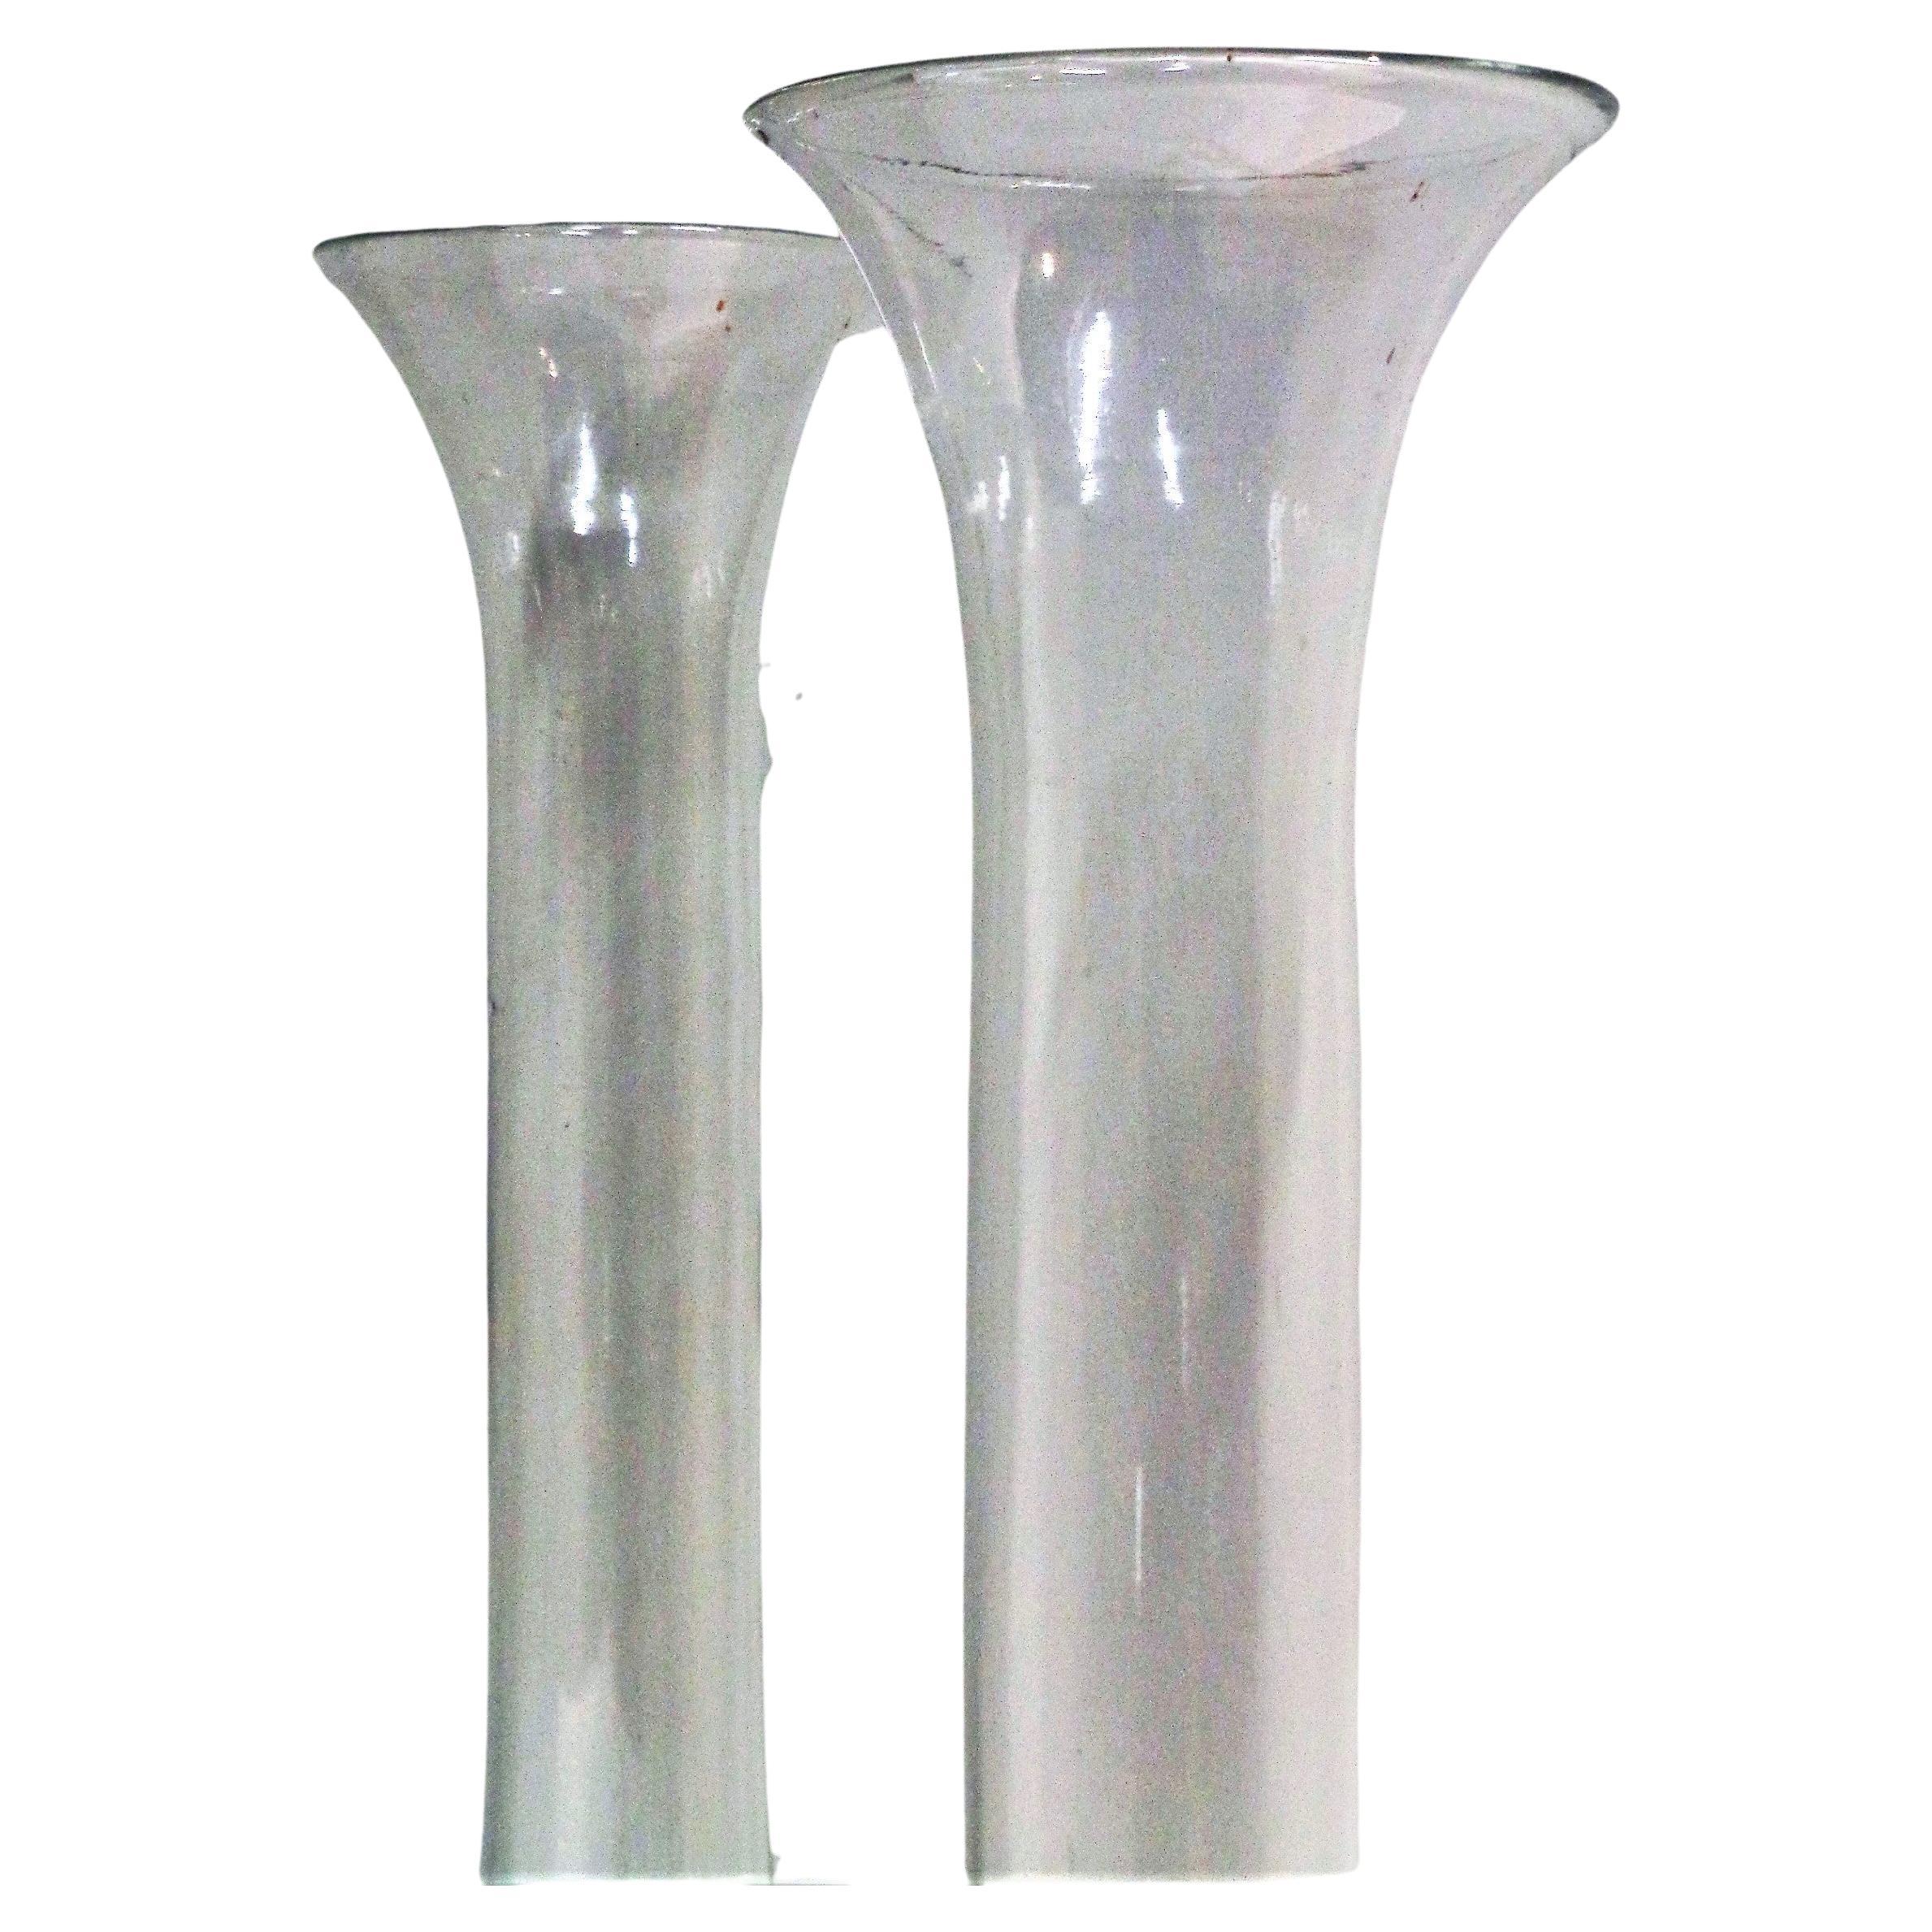 A pair of antique clear blown glass flower iris gladioli vases with rough pontil marks on underside bottom. Tall sculptural elegant form. Circa 1930-1940
 **** Price listed is for the pair ***** 
Look at all pictures and read condition report in